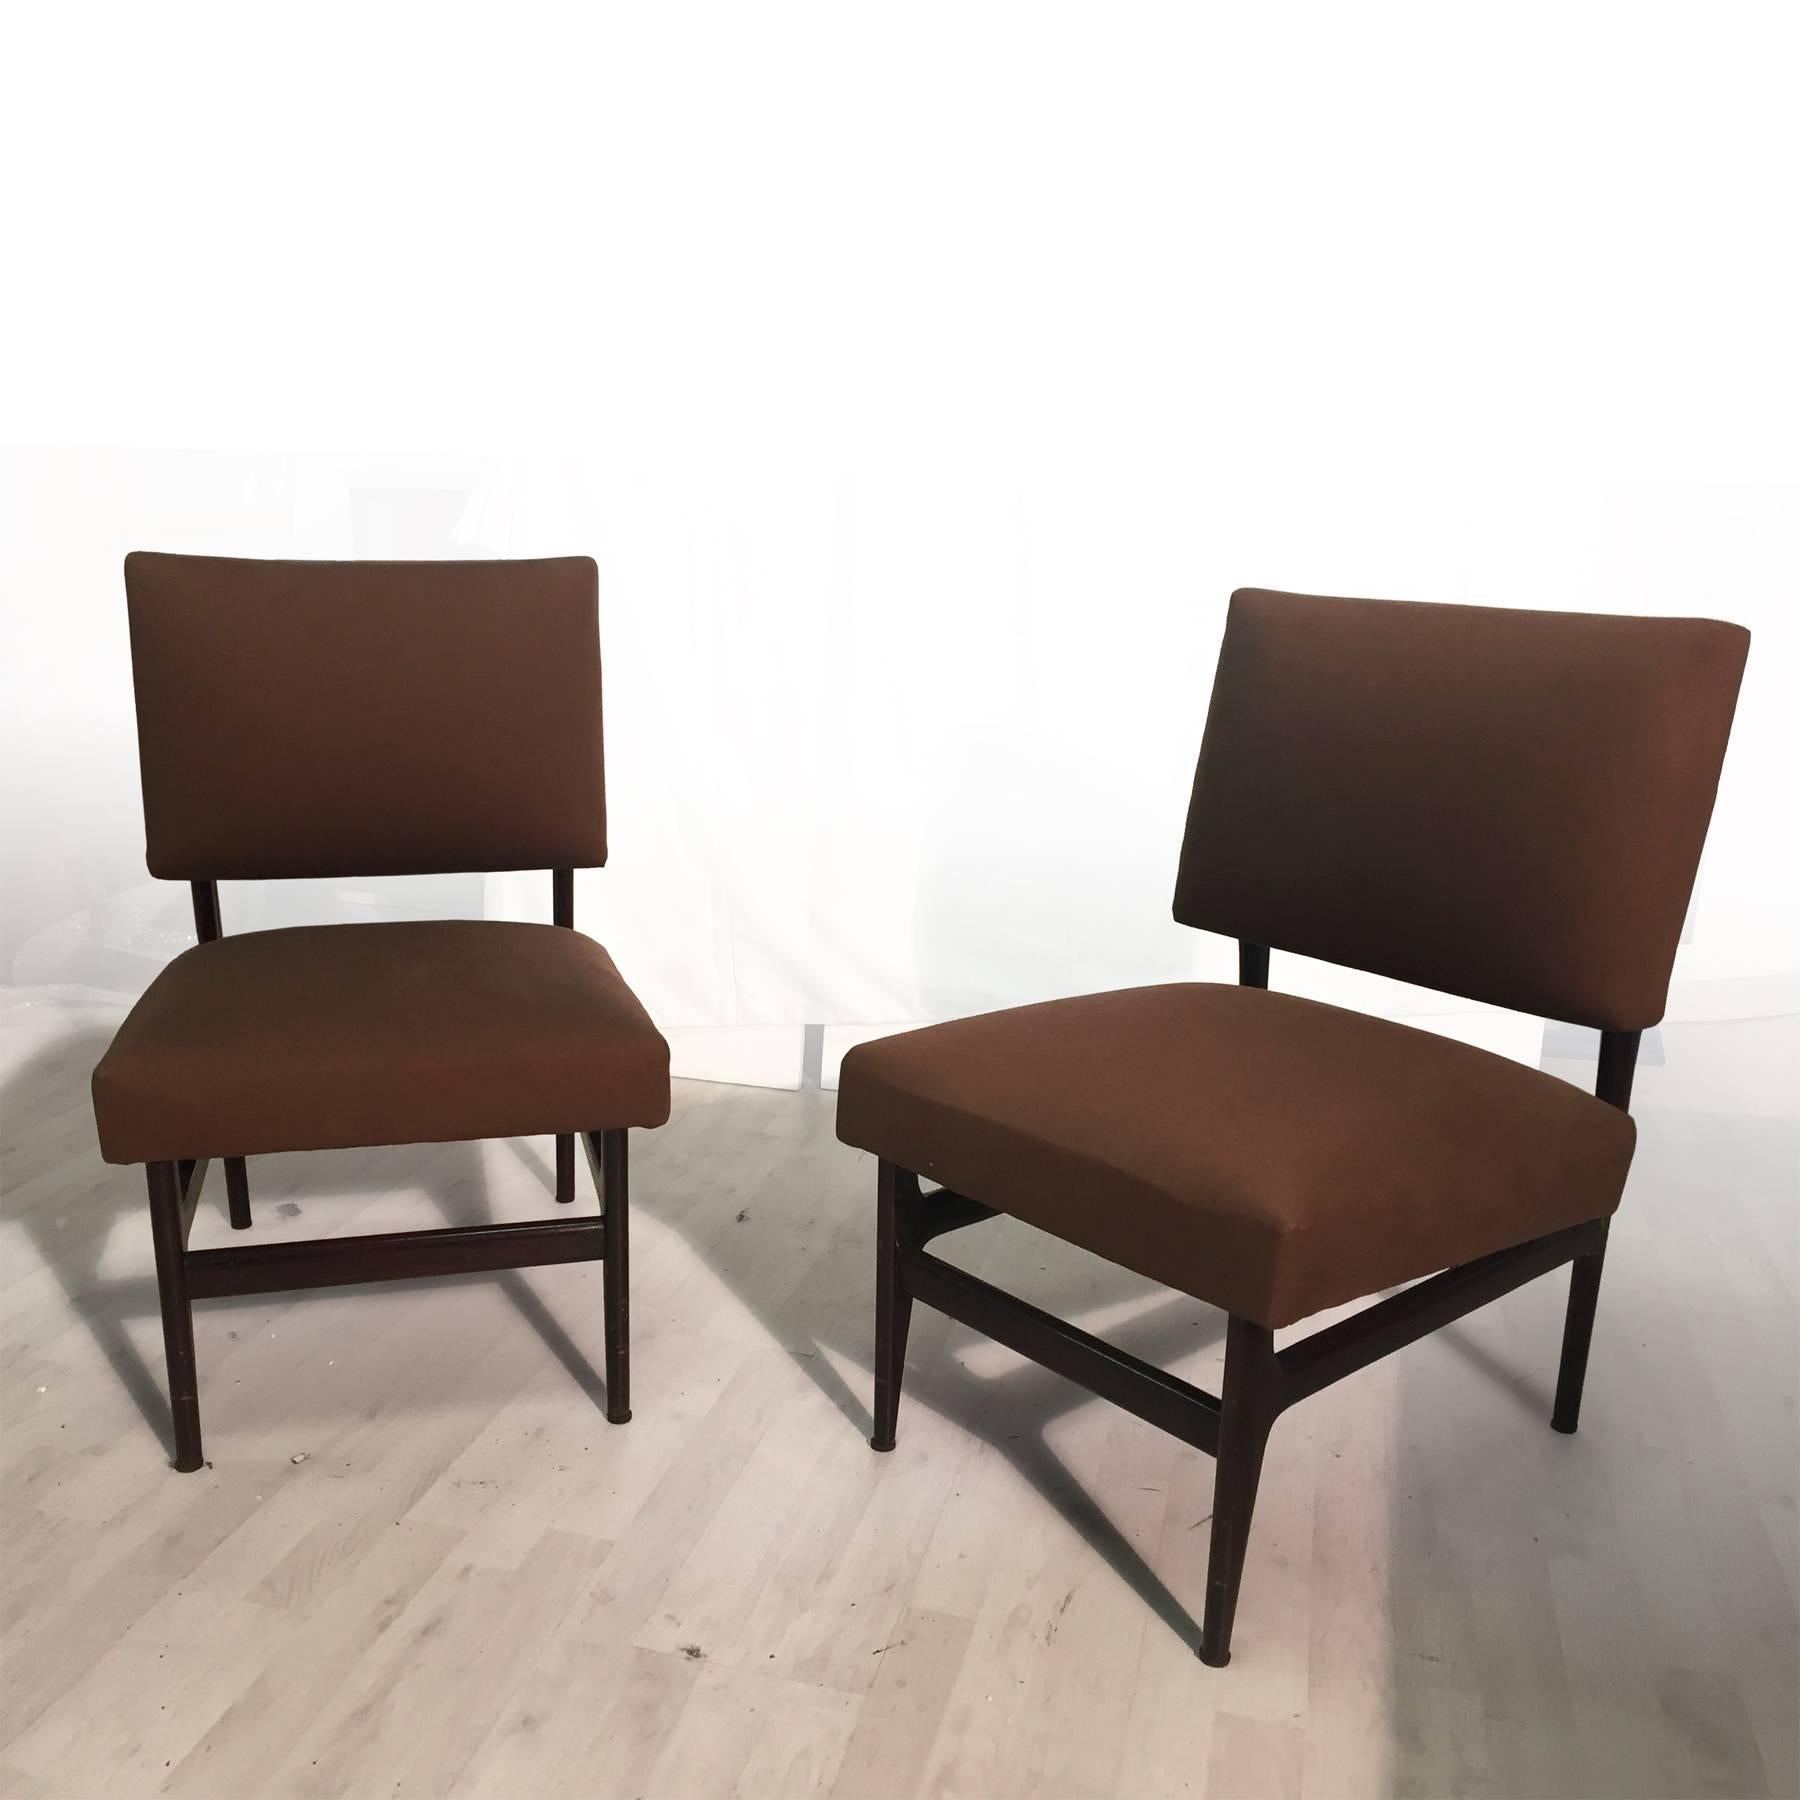 Mid-Century Modern Italian Mid-Century Lounge Chairs by Vittorio Dassi, Set of Two, 1950s For Sale